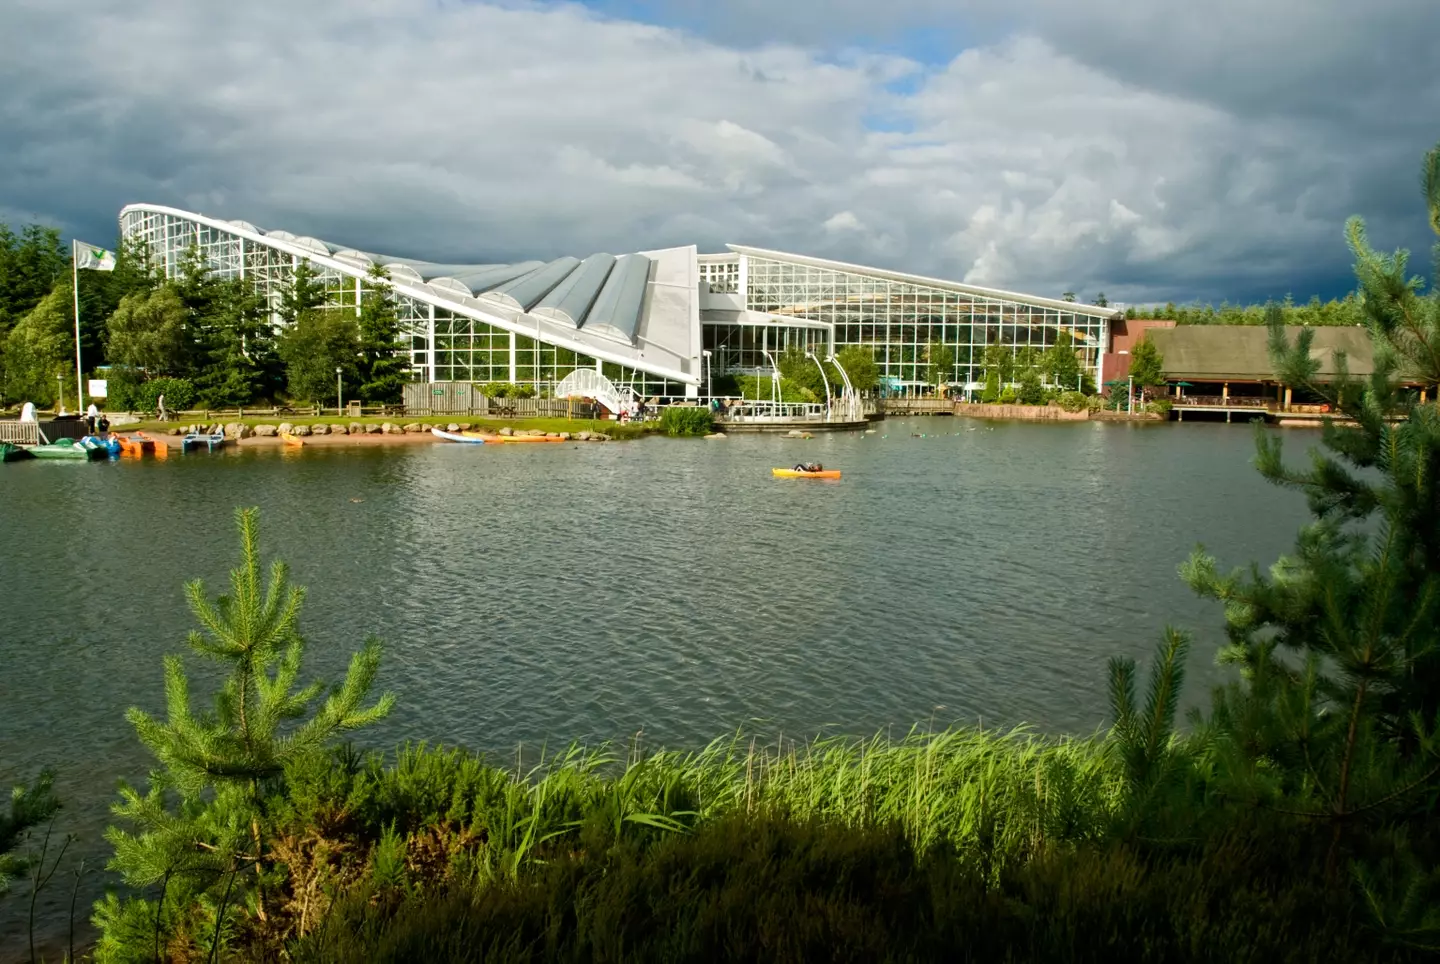 Center Parcs has six resorts in the UK and Ireland.